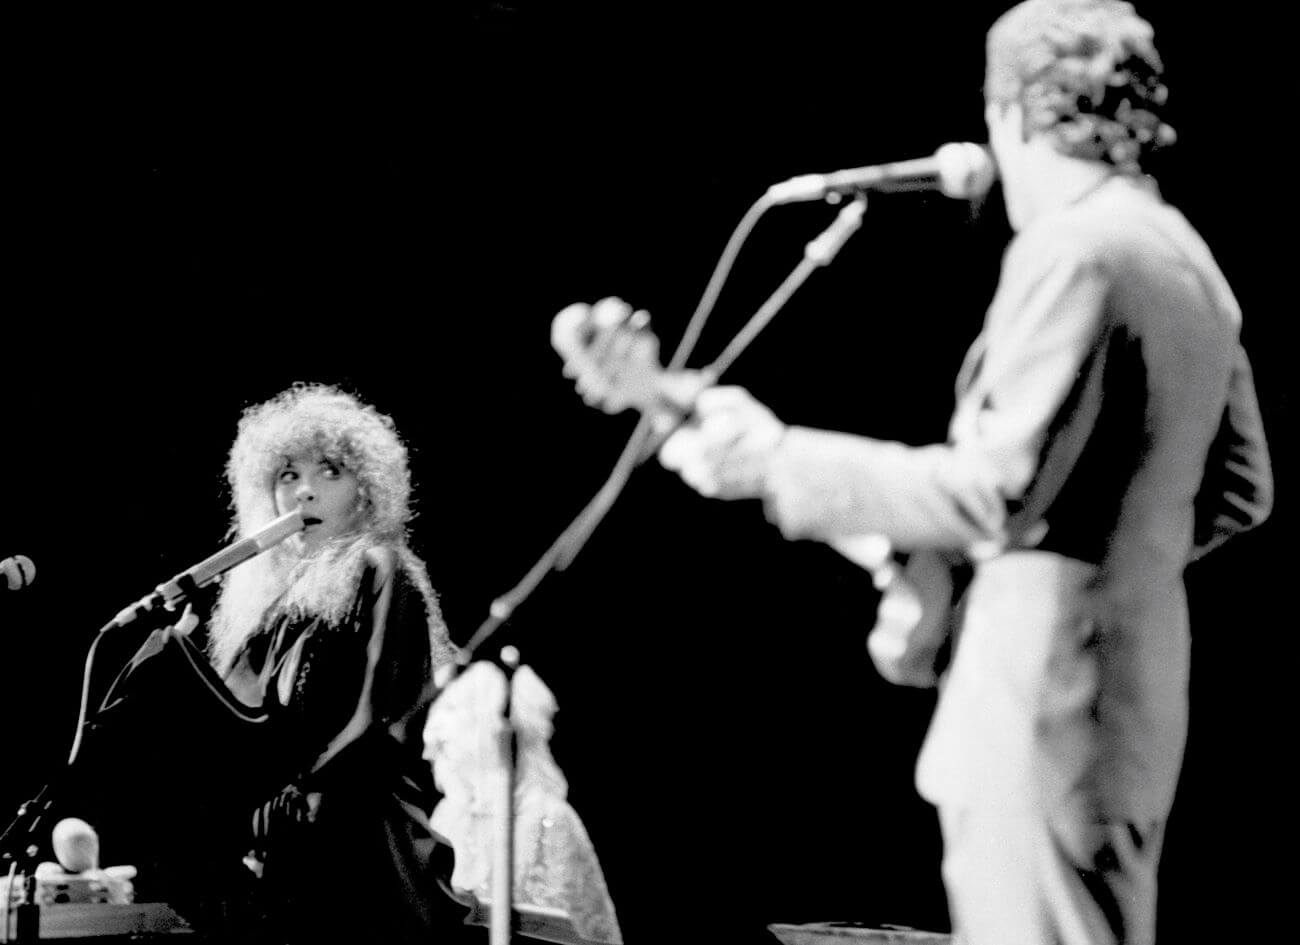 A black and white picture of Fleetwood Mac's Stevie Nicks singing into a microphone and looking at Lindsey Buckingham, who plays guitar and sings. 